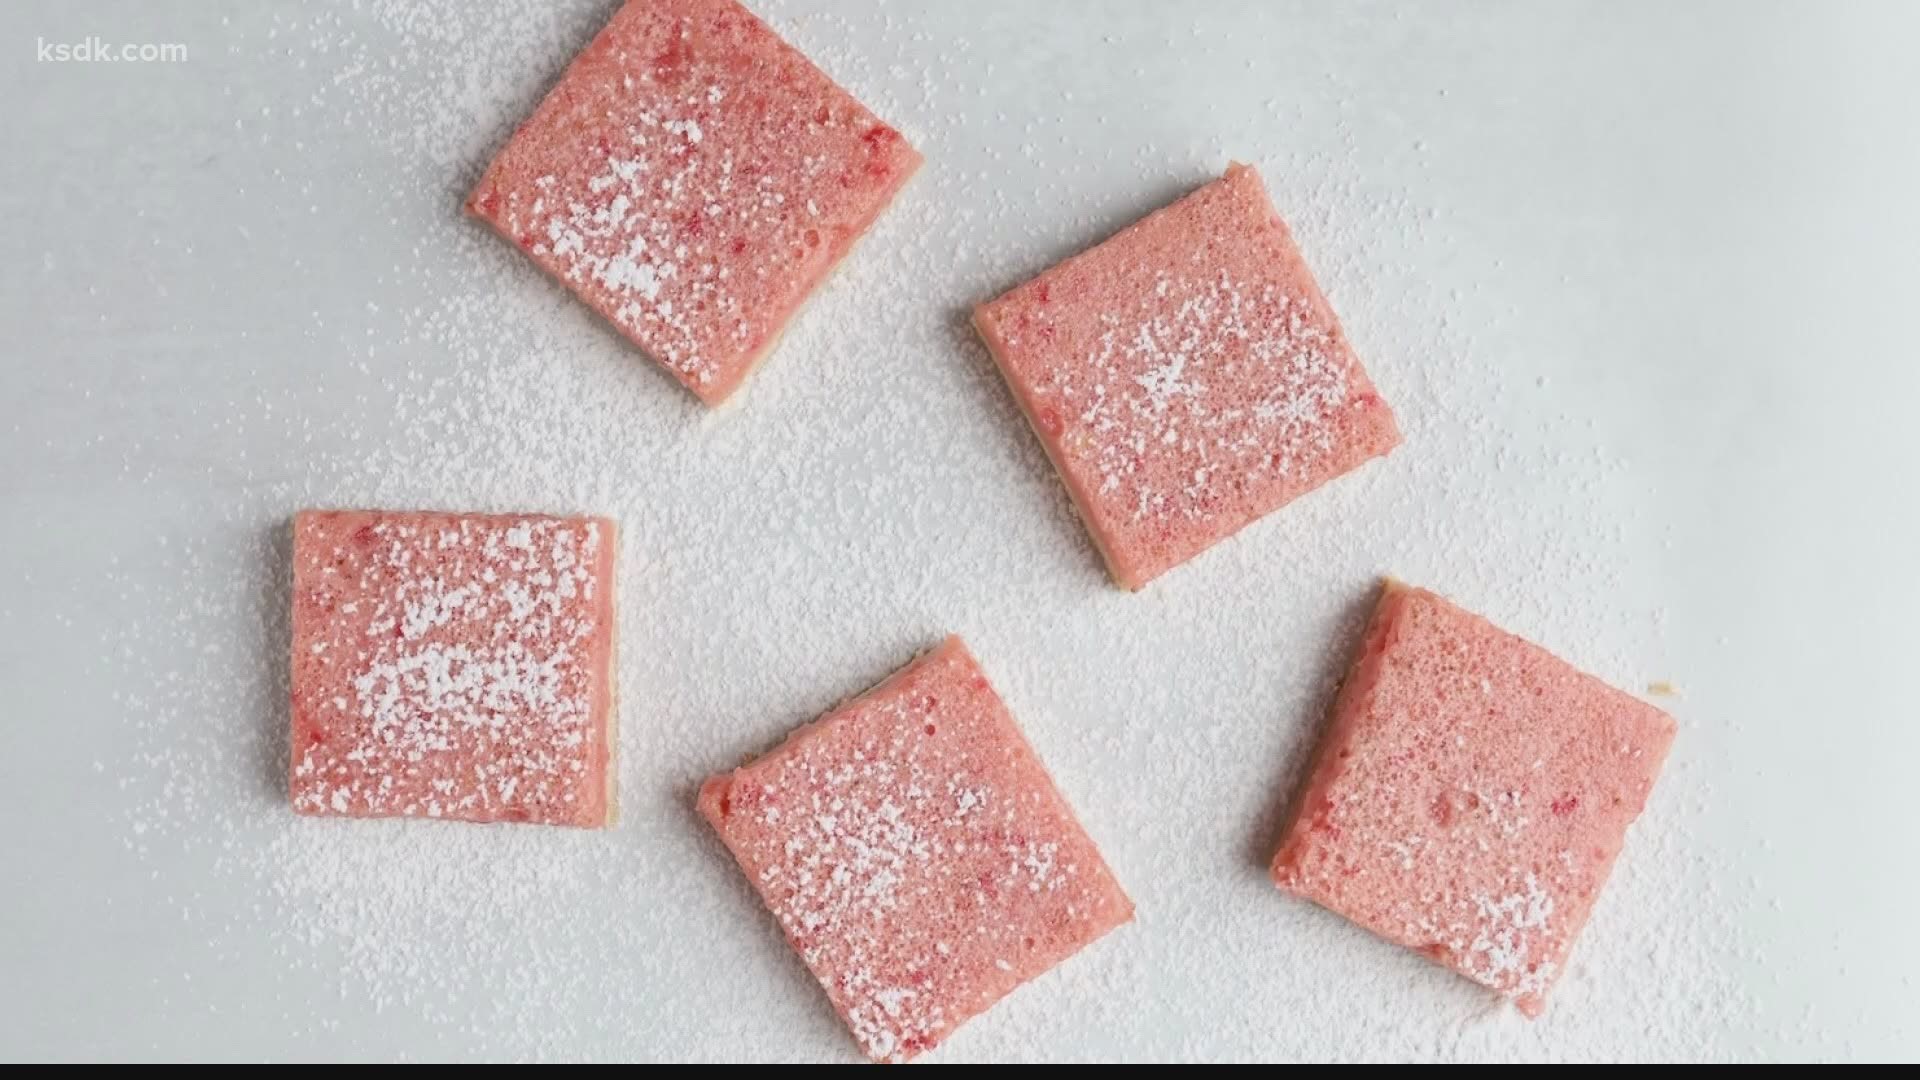 If you’re looking for a delicious summertime snack, look no further! Local blogger Liz Rotz shares a recipe for Strawberry Lemonade Bars.